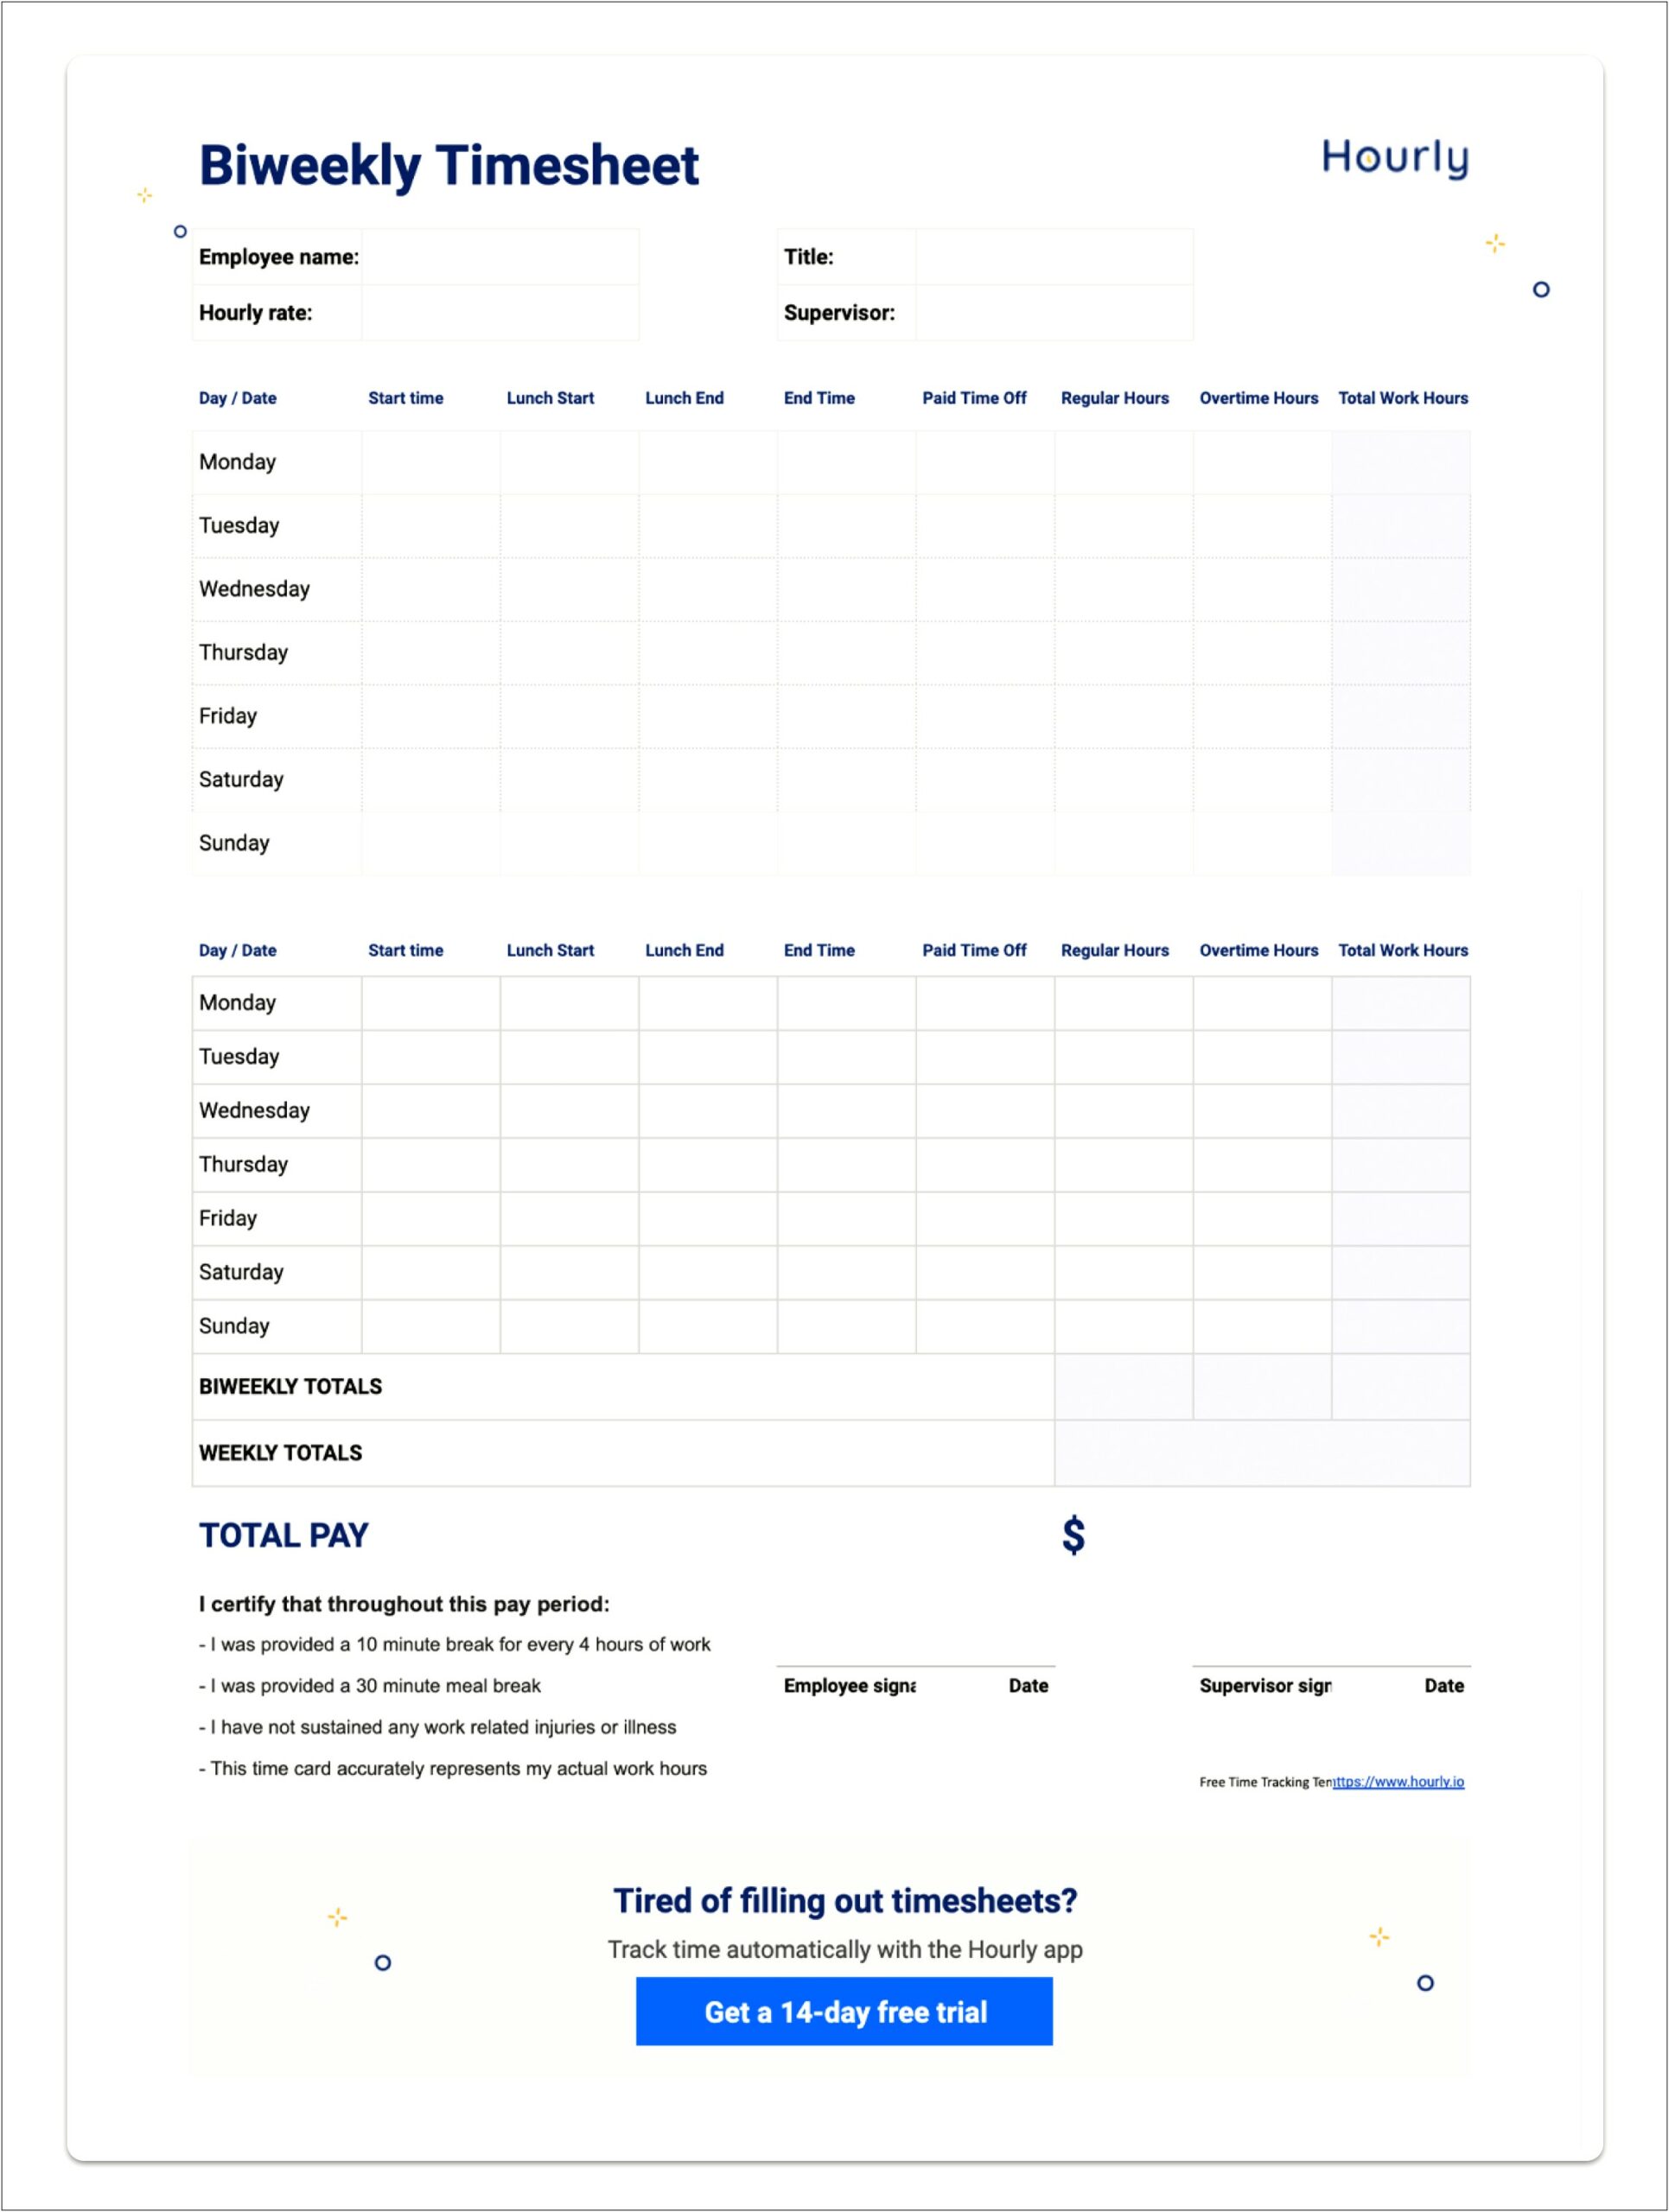 Basic Group Timesheet Template For All Employees Word